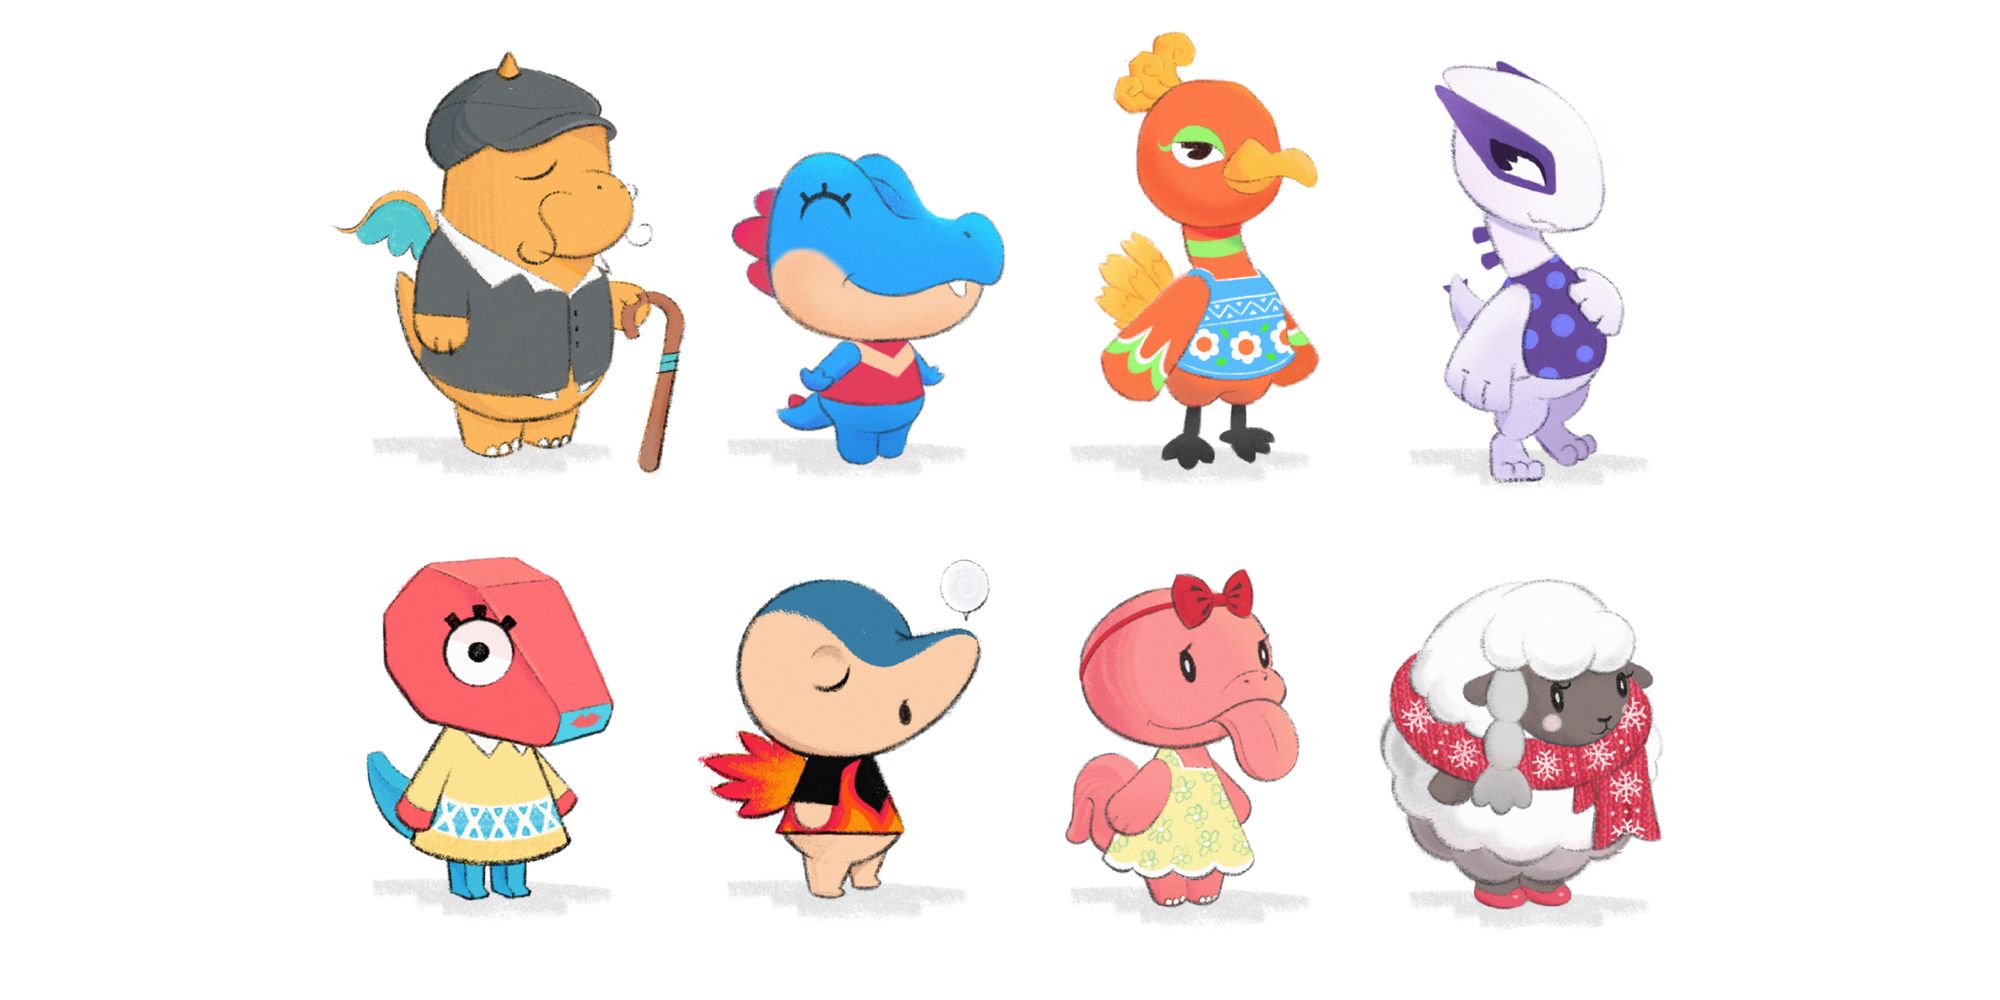 Pokémon Become Animal Crossing Villagers Thanks To Adorable Stickers -  